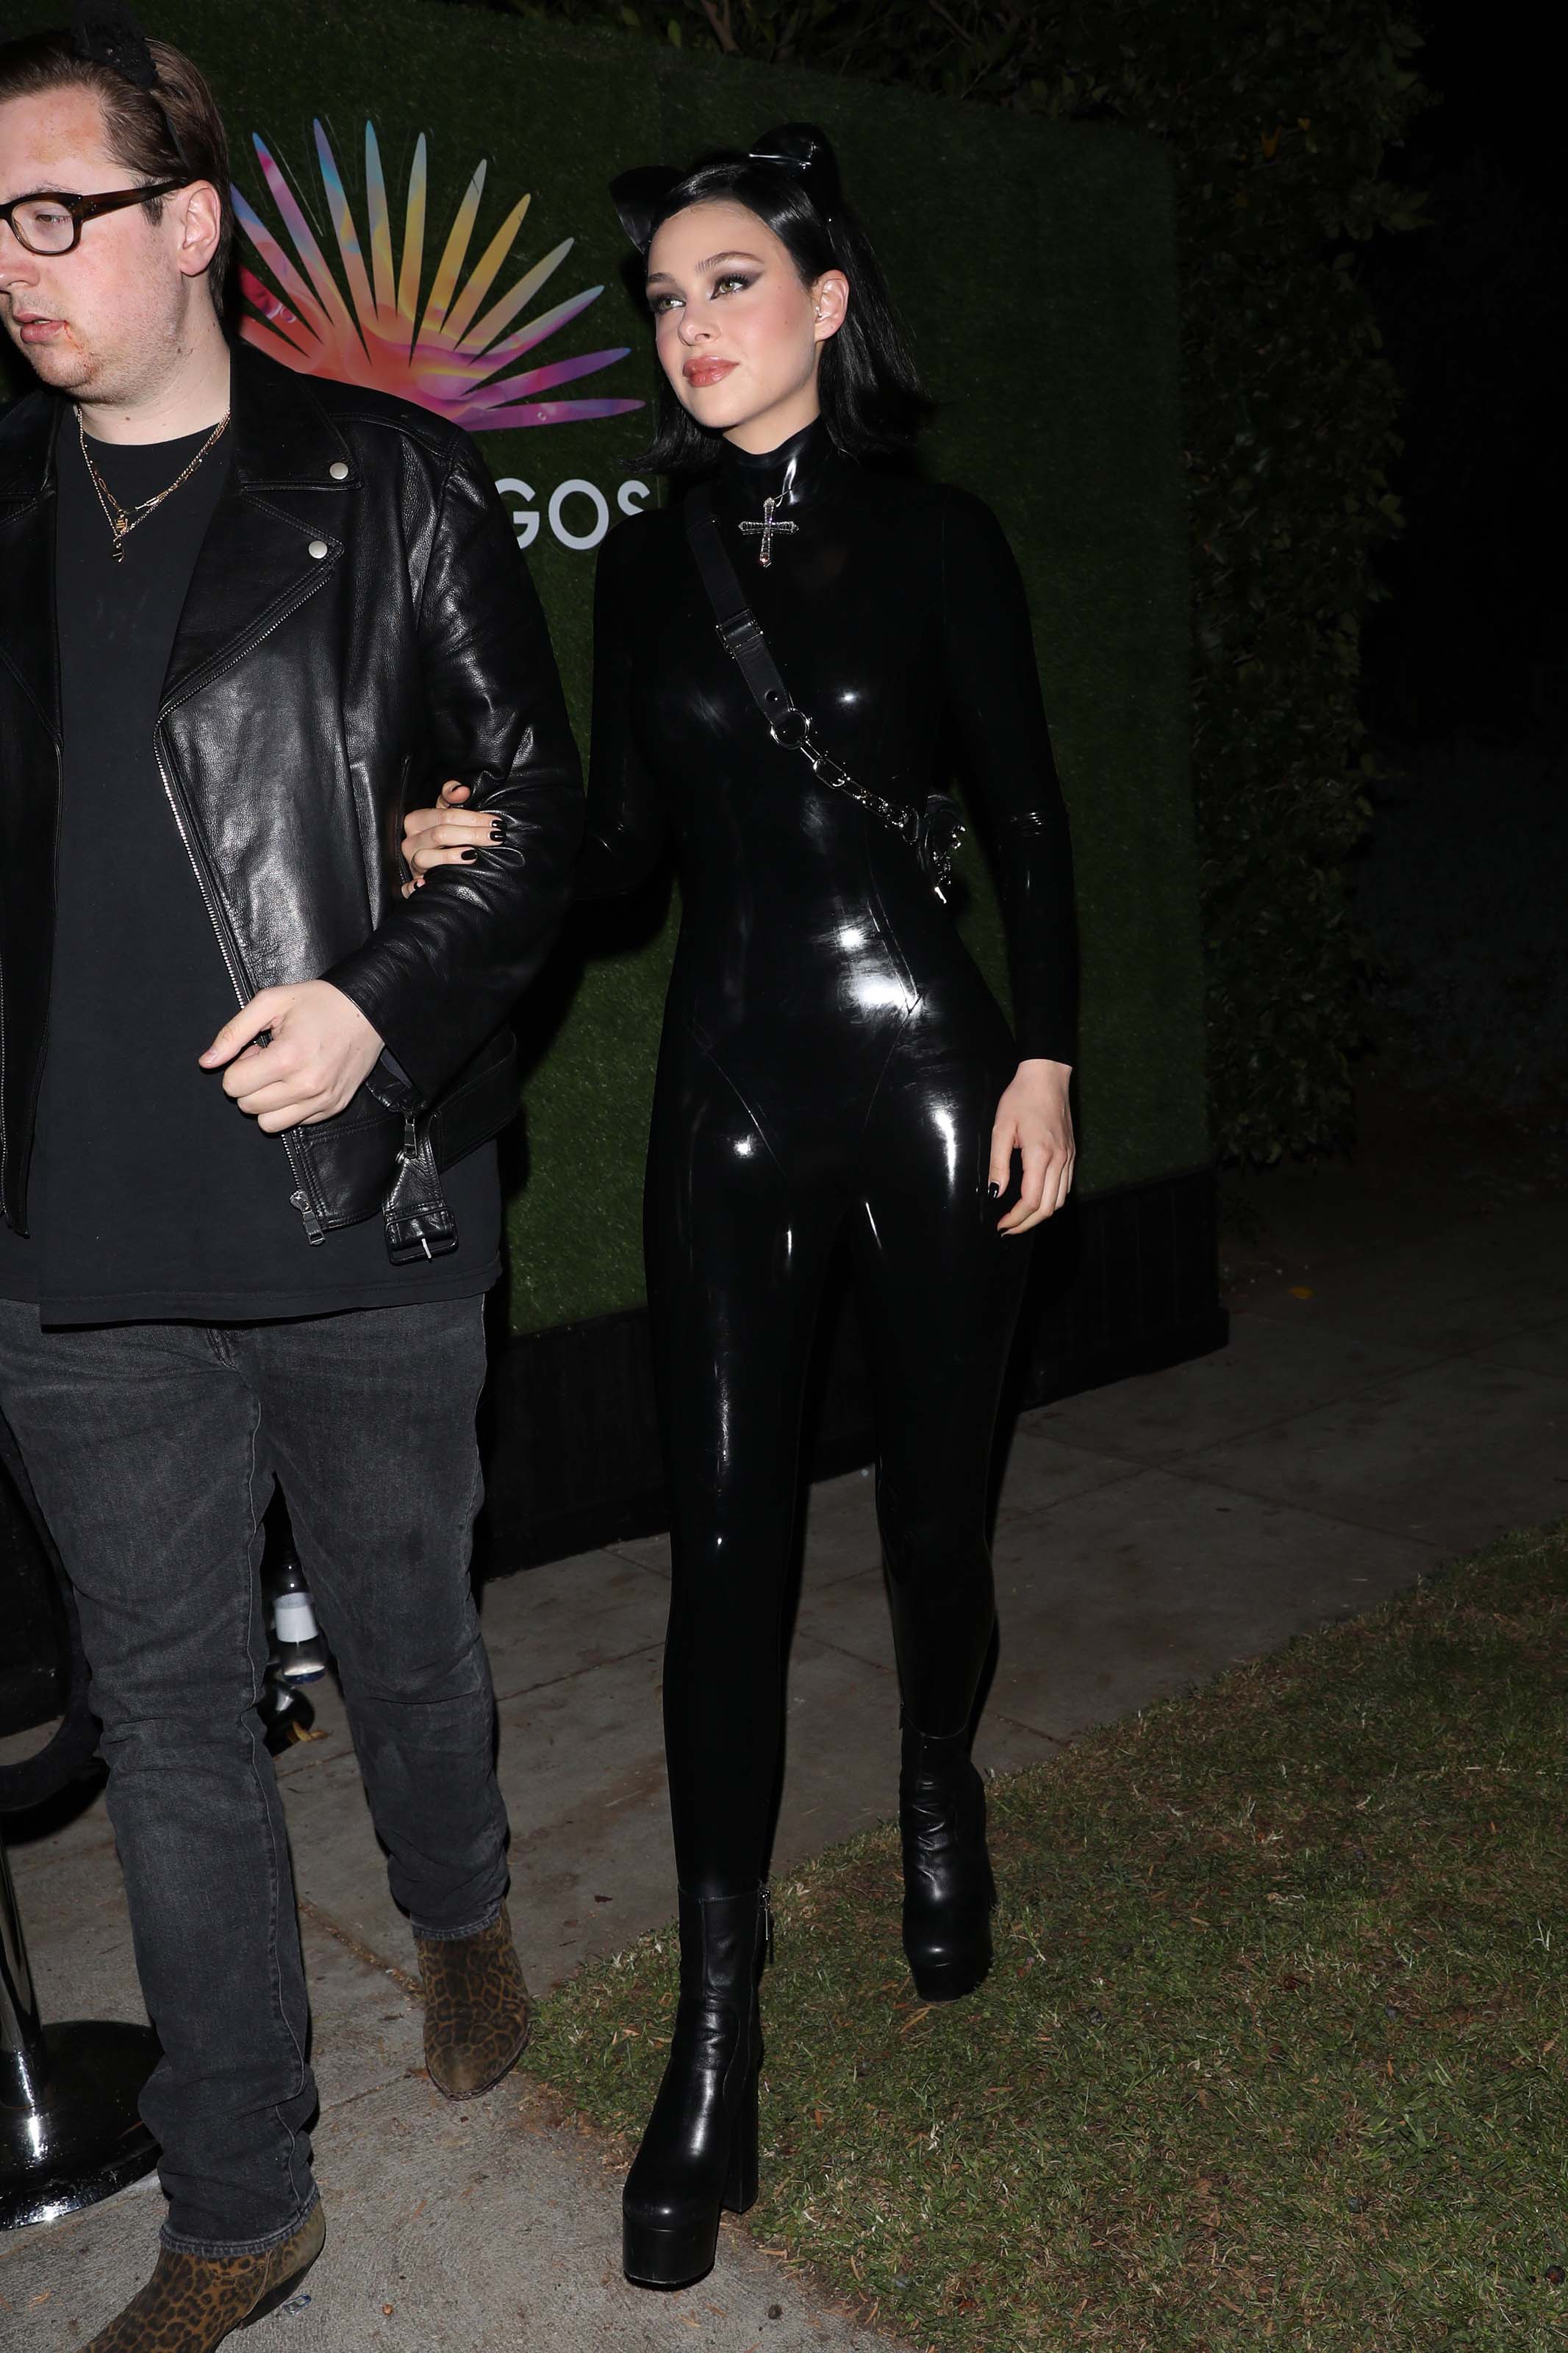 Nicola Peltz and her friend head to the 2019 Casamigos Halloween party